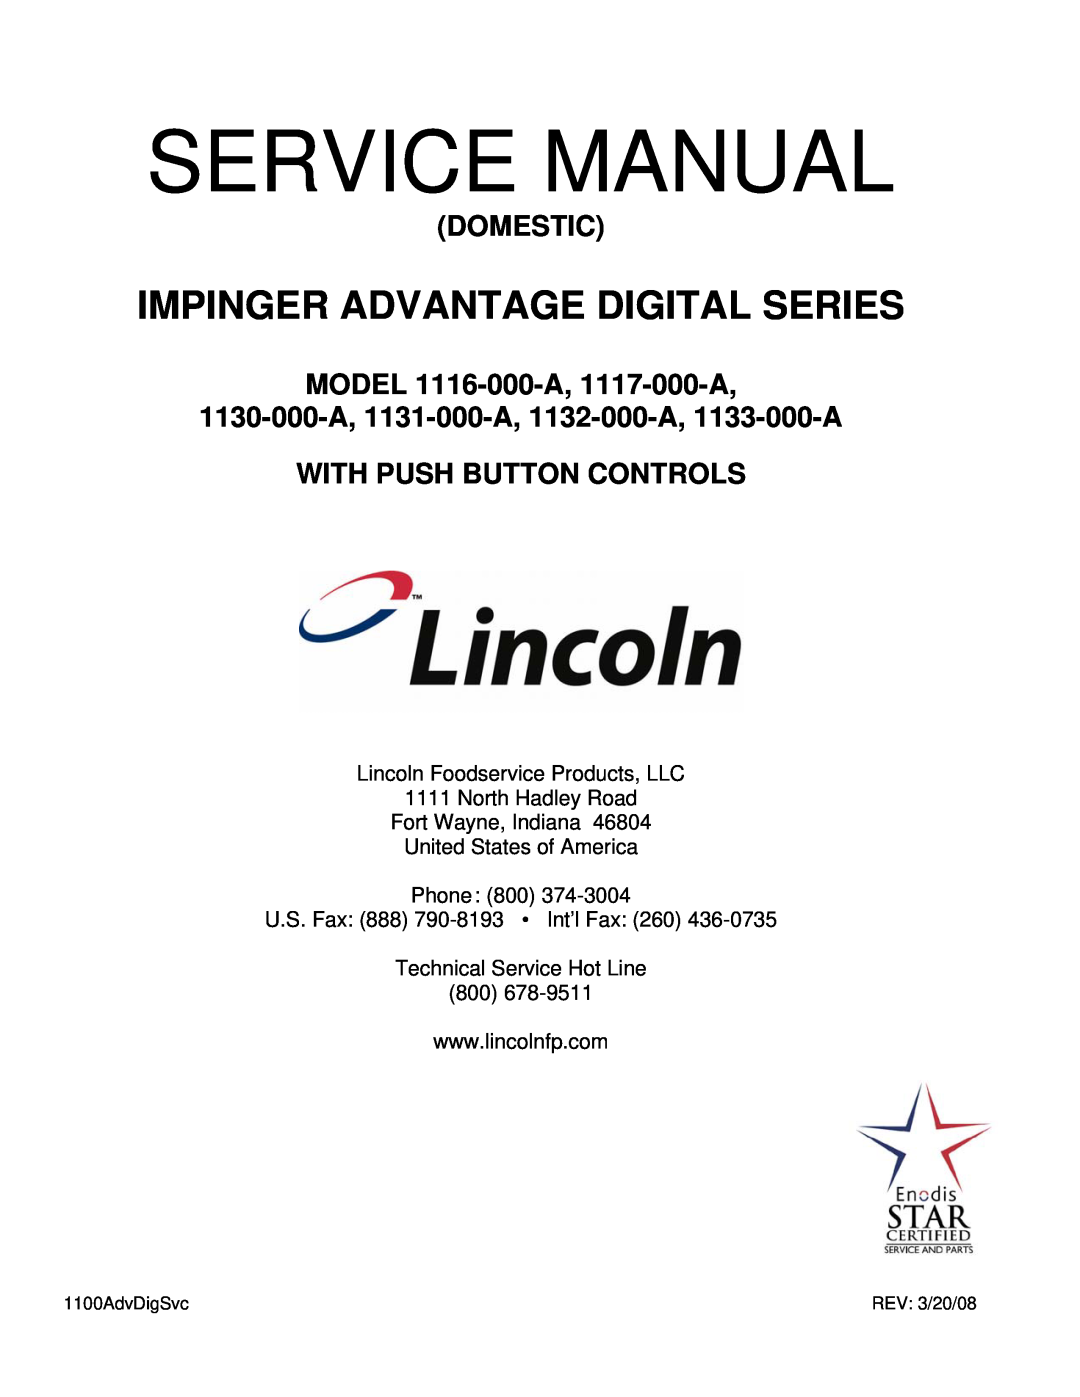 Lincoln 1117-000-A service manual Lincoln Foodservice Products, LLC, North Hadley Road Fort Wayne, Indiana, Domestic 